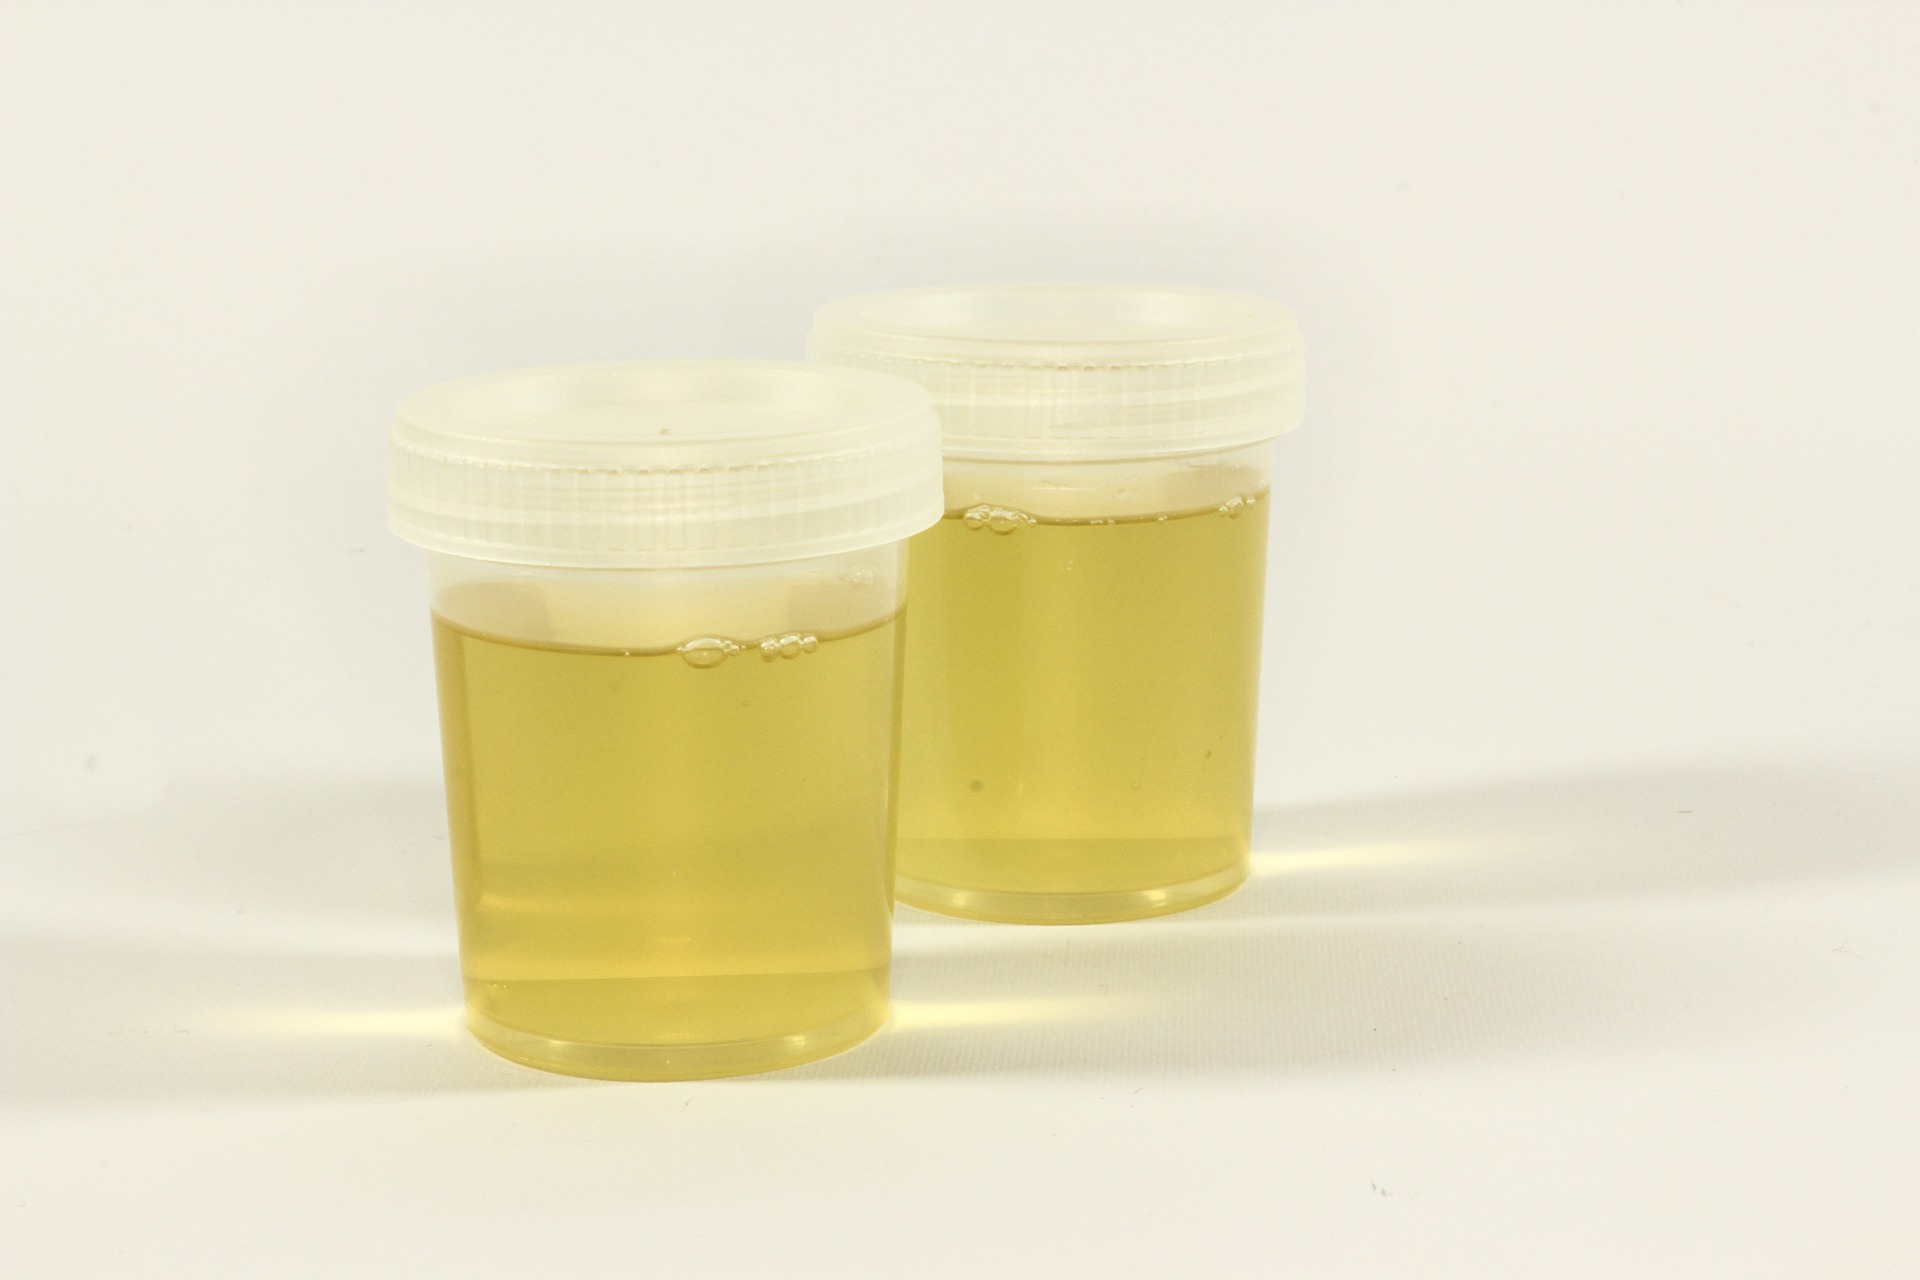 Is urine actually sterile?